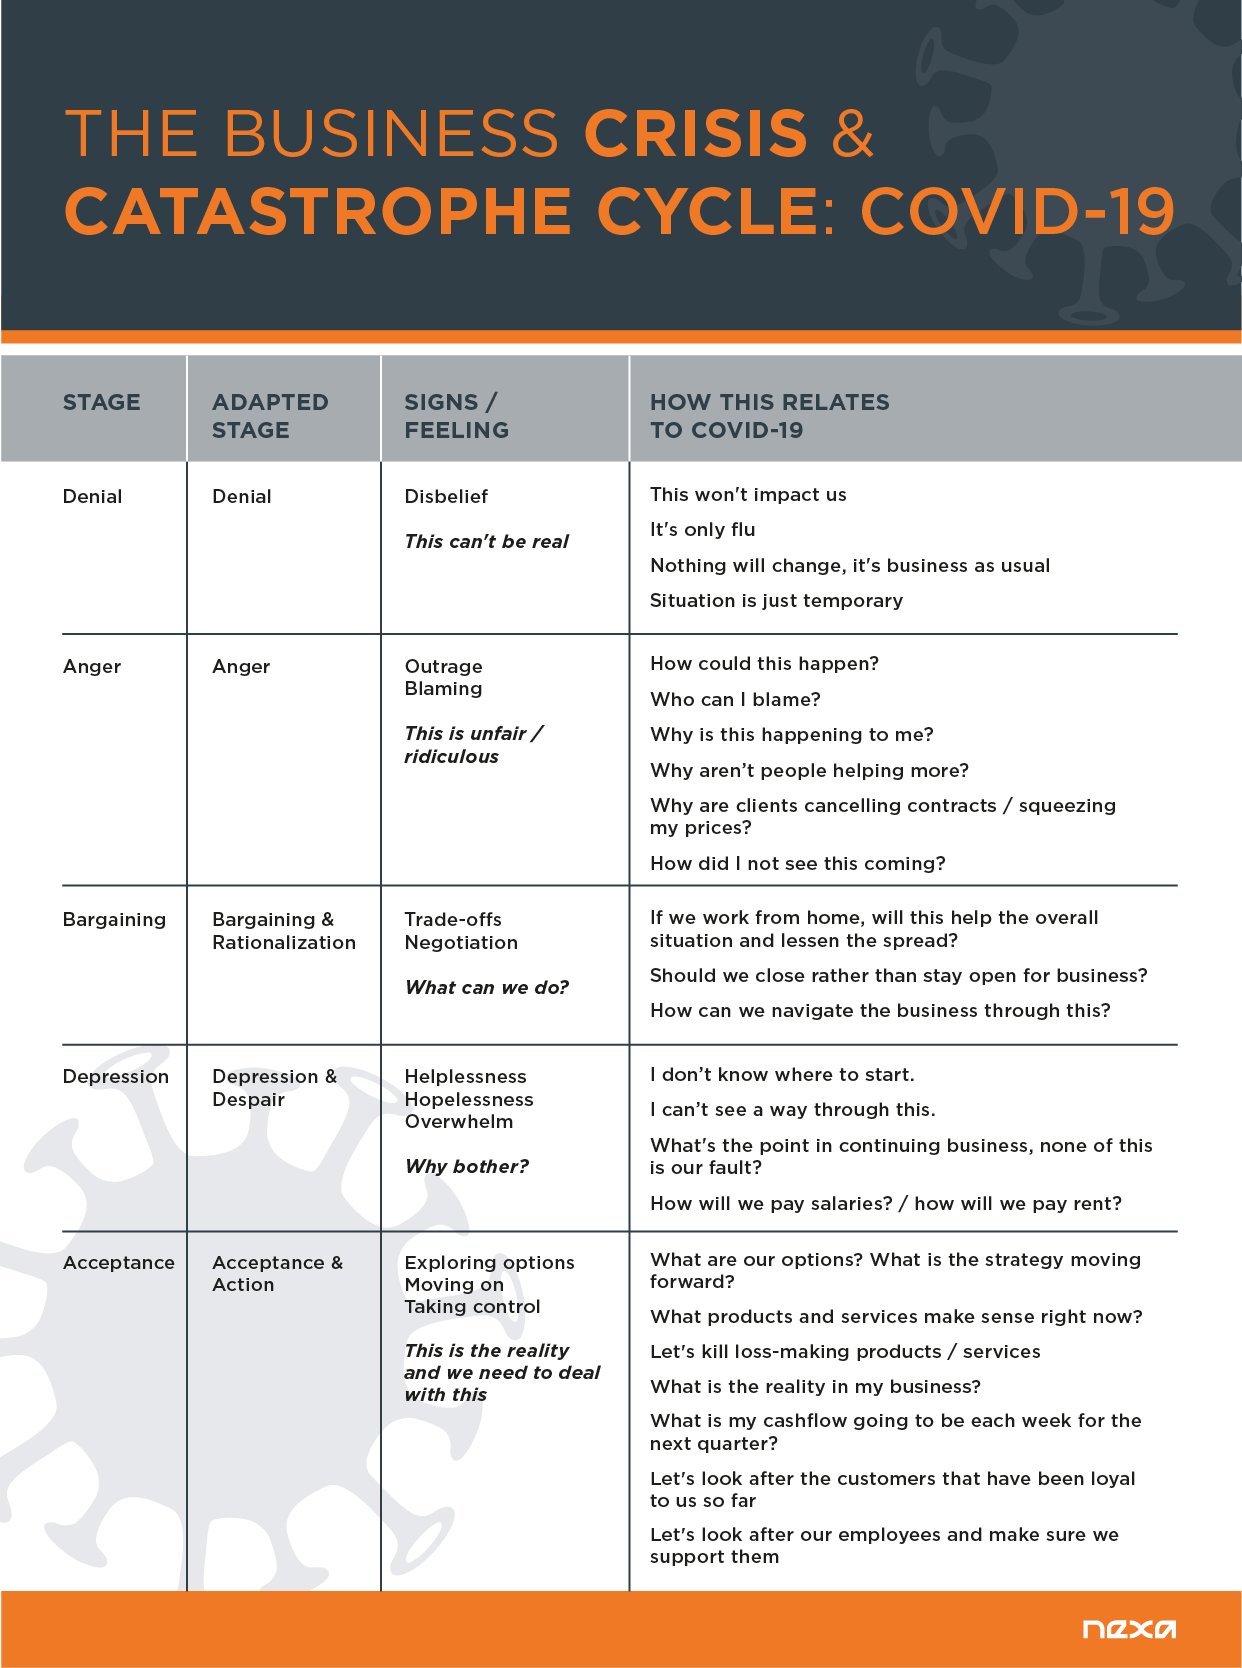 Business Survival - The Business Crisis & Catastrophe Cycle related to COVID-19  Coronavirus - Nexa